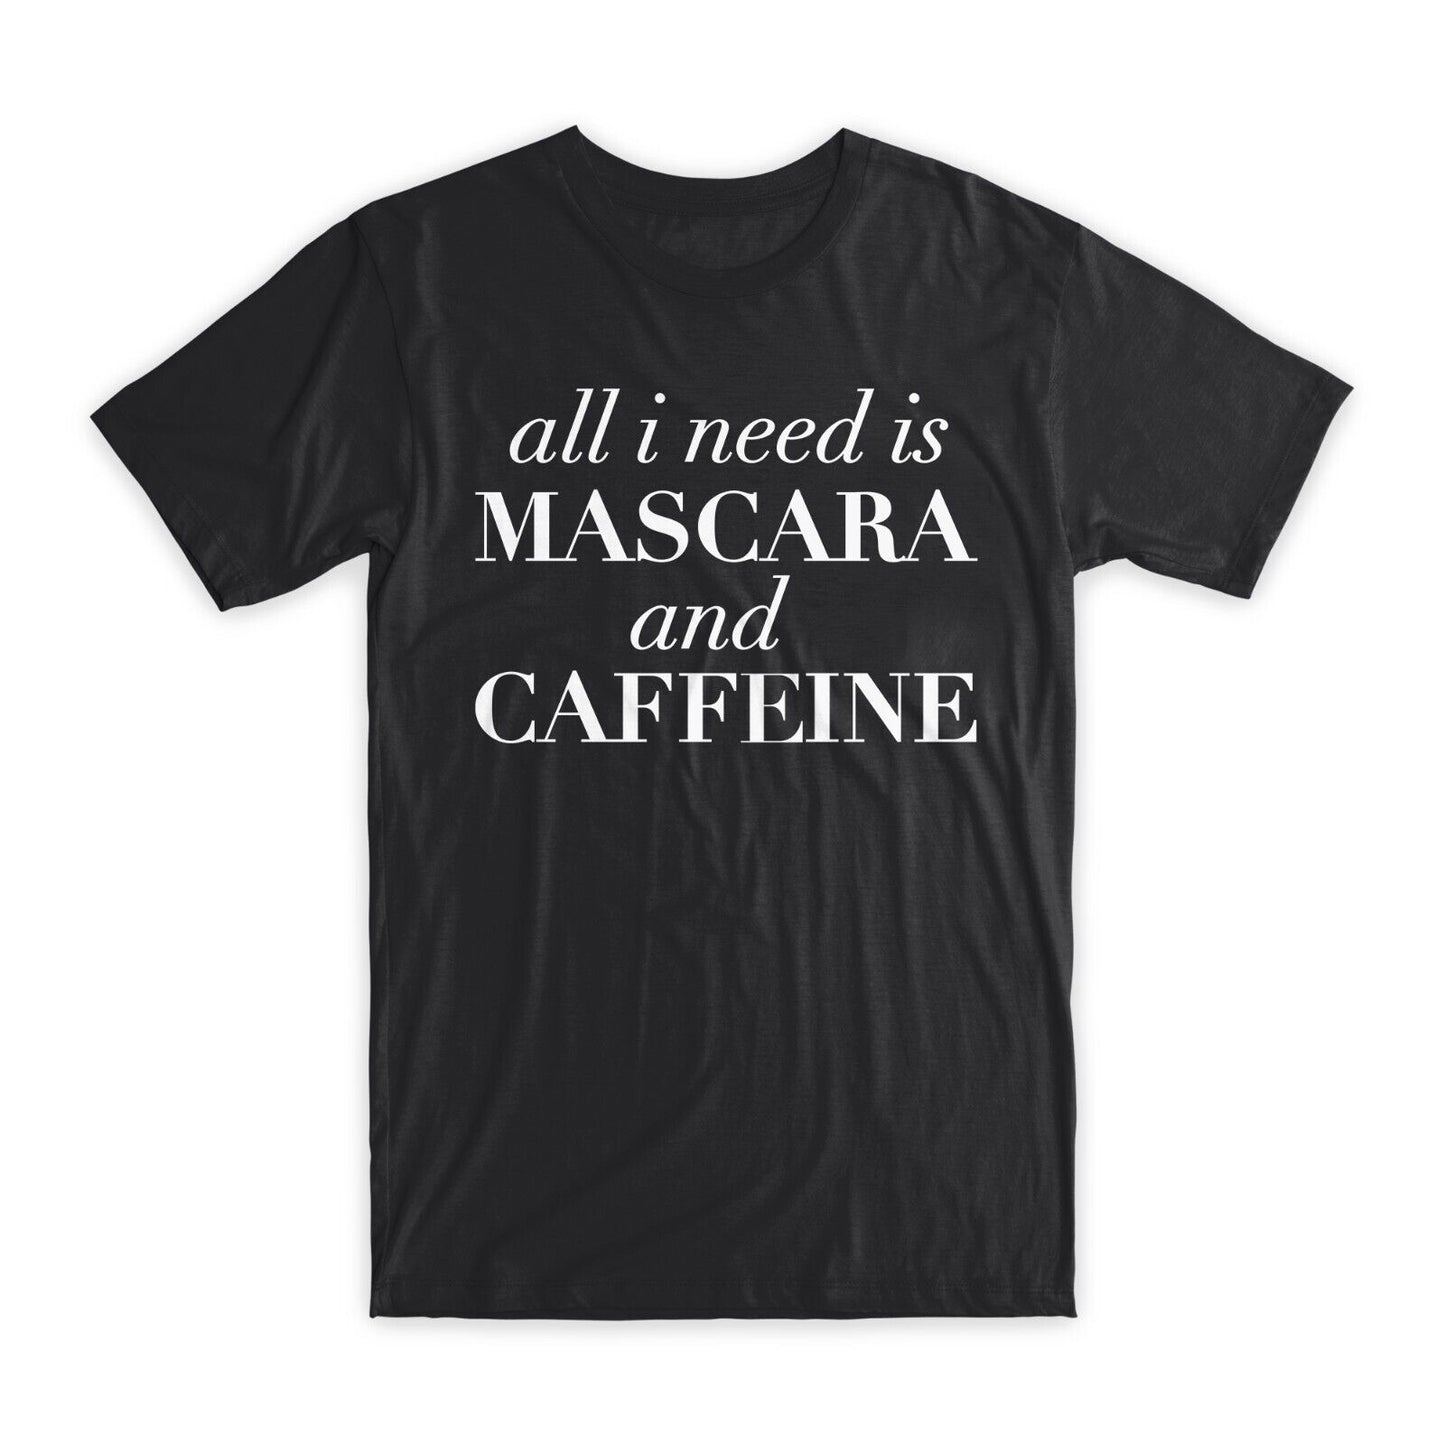 All I Need is Mascara and Caffeine T-Shirt Premium Soft Cotton Funny T Gift NEW